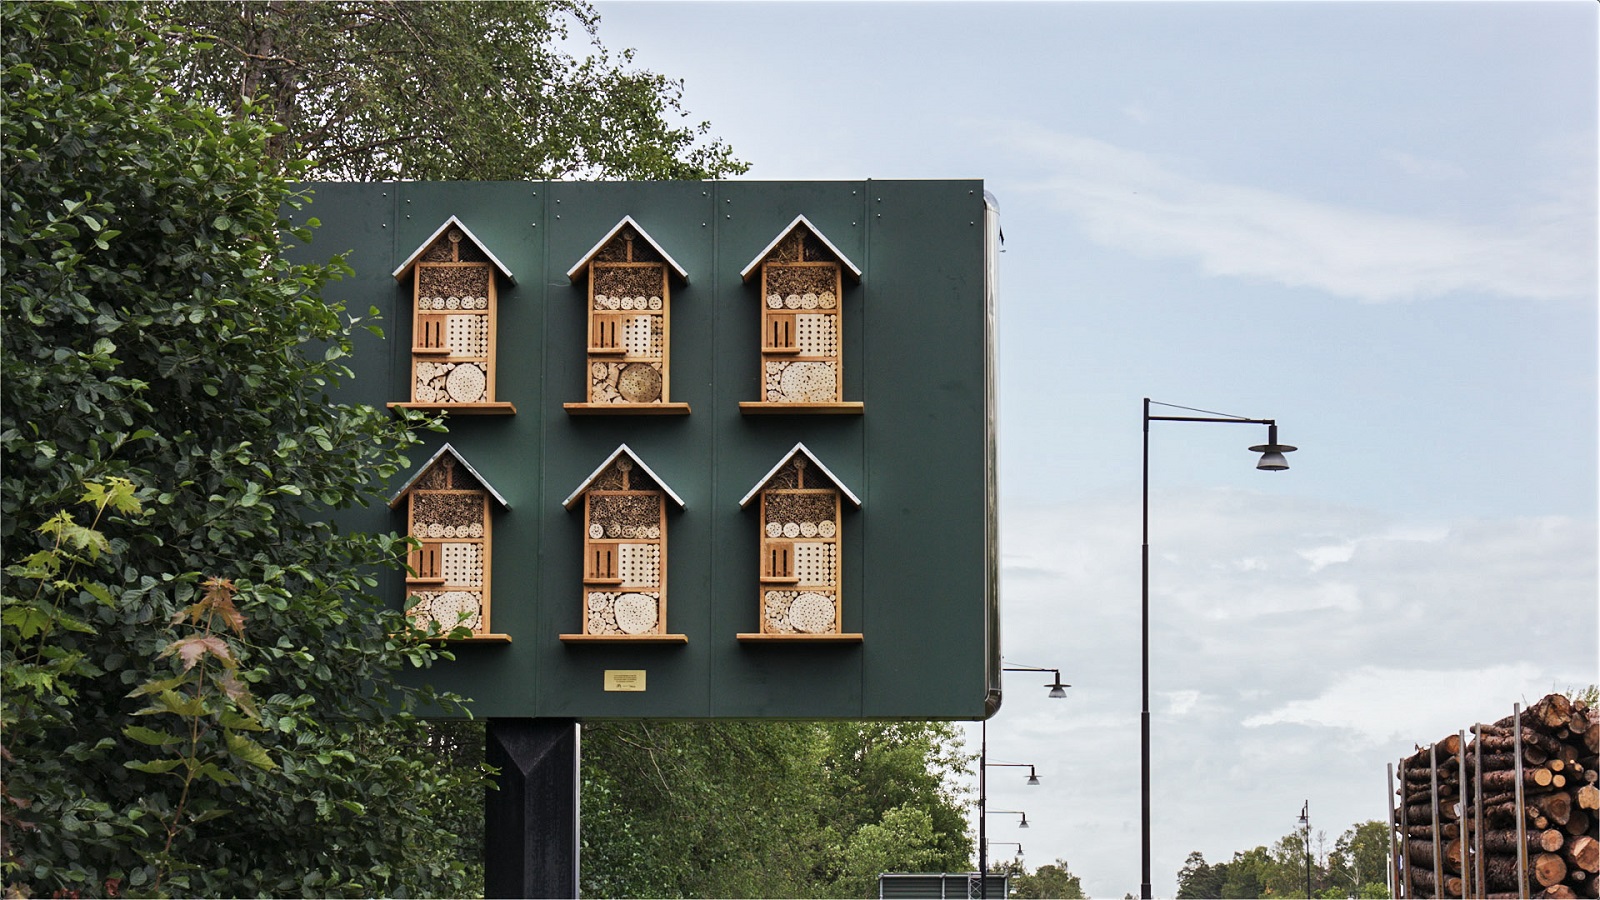 McDonald’s Transforms Its Billboards into Bee Hotels